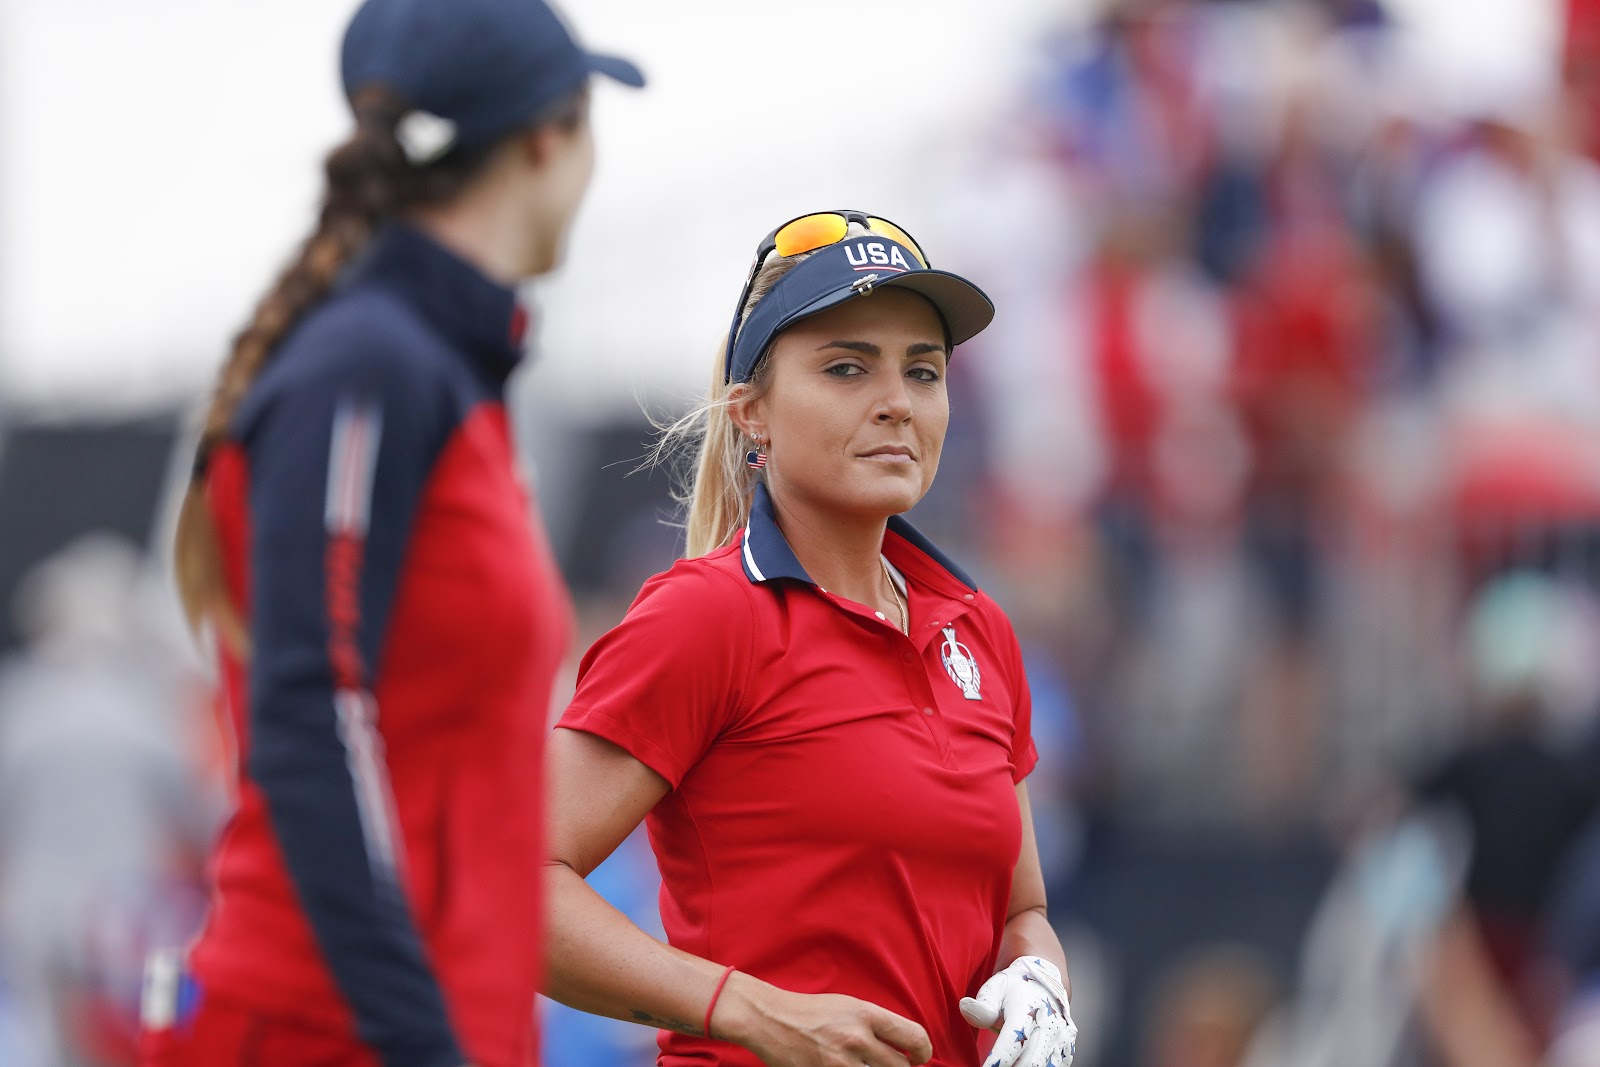 The Solheim Cup 2021